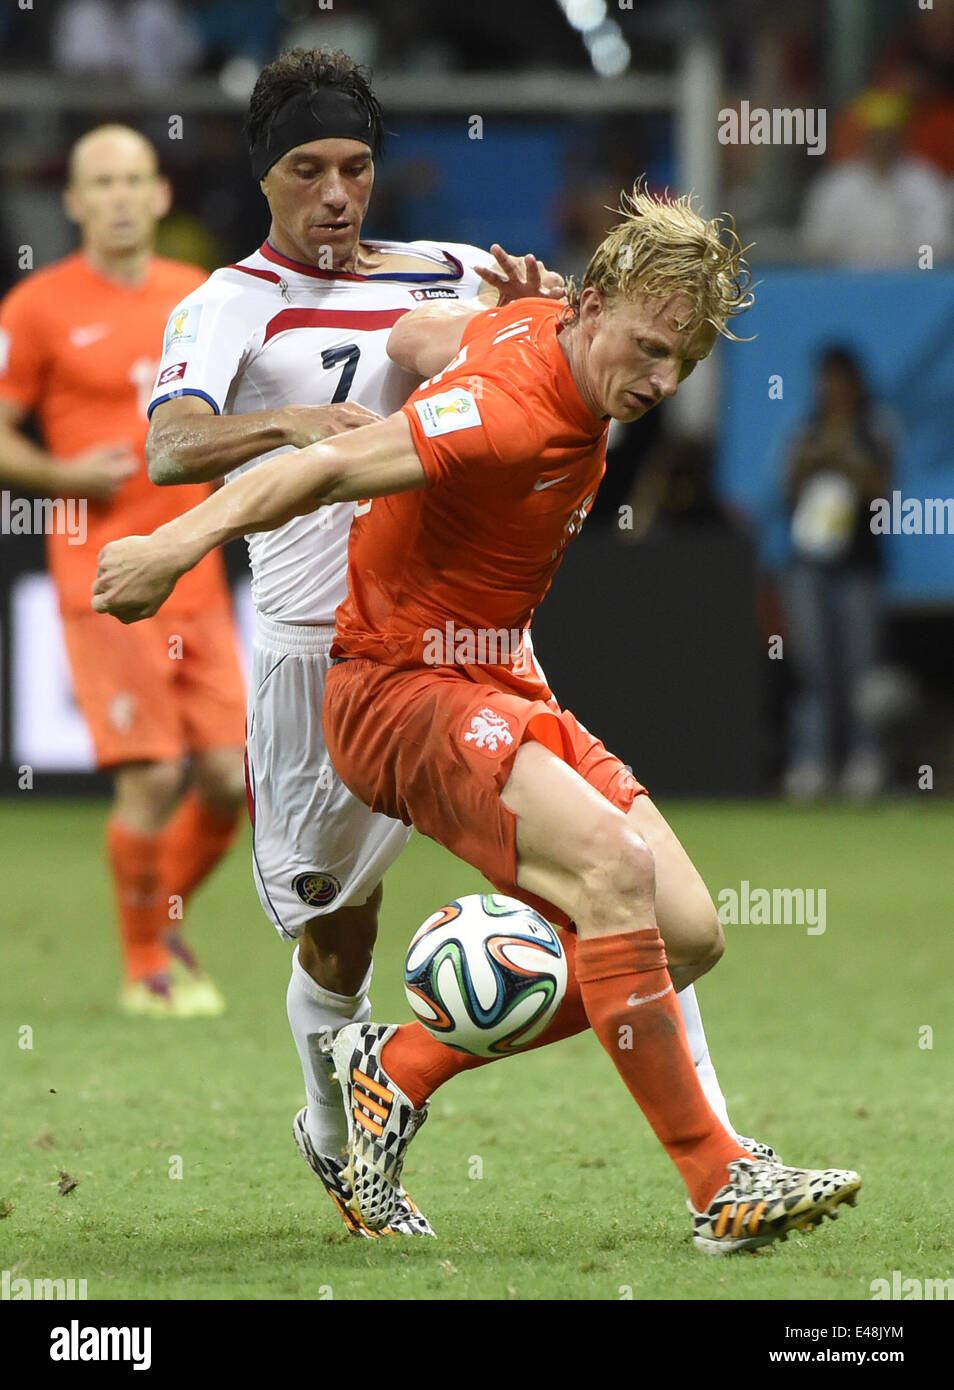 Salvador, Brazil. 5th July, 2014. Netherlands's Dirk Kuyt vies with Costa Rica's Christian Bolanos during a quarter-finals match between Netherlands and Costa Rica of 2014 FIFA World Cup at the Arena Fonte Nova Stadium in Salvador, Brazil, on July 5, 2014. Netherlands won 4-3 on penalties over Costa Rica after a 0-0 tie and qualified for semi-finals on Saturday. Credit:  Lui Siu Wai/Xinhua/Alamy Live News Stock Photo